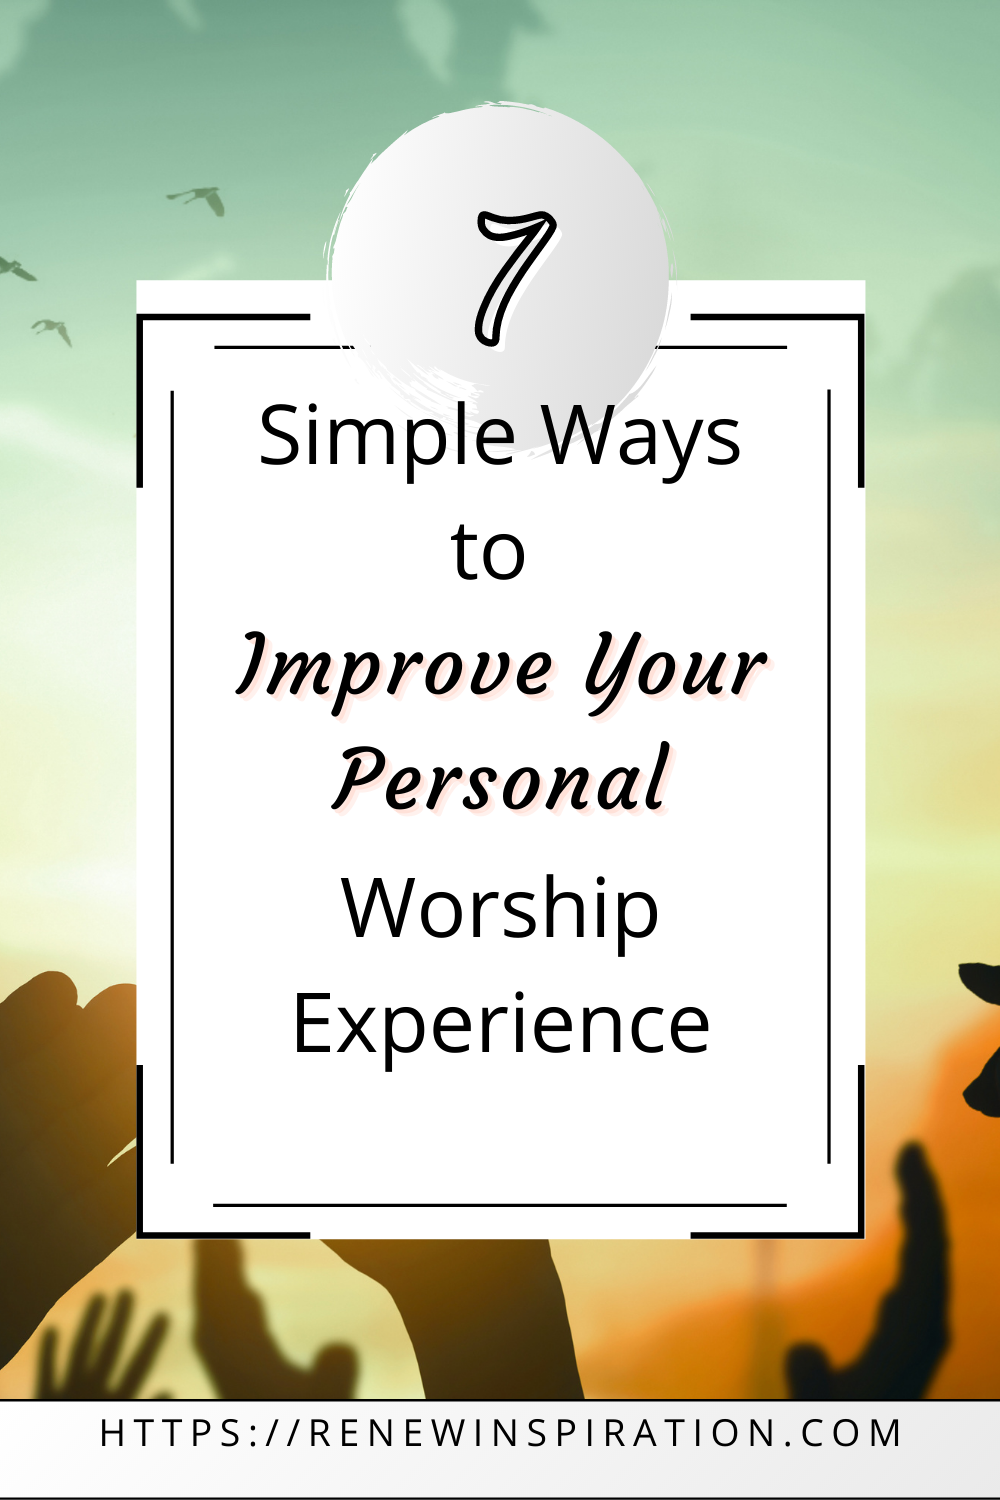 Renew Inspiration, 7 Simple Ways to Improve Your Personal Worship Experience